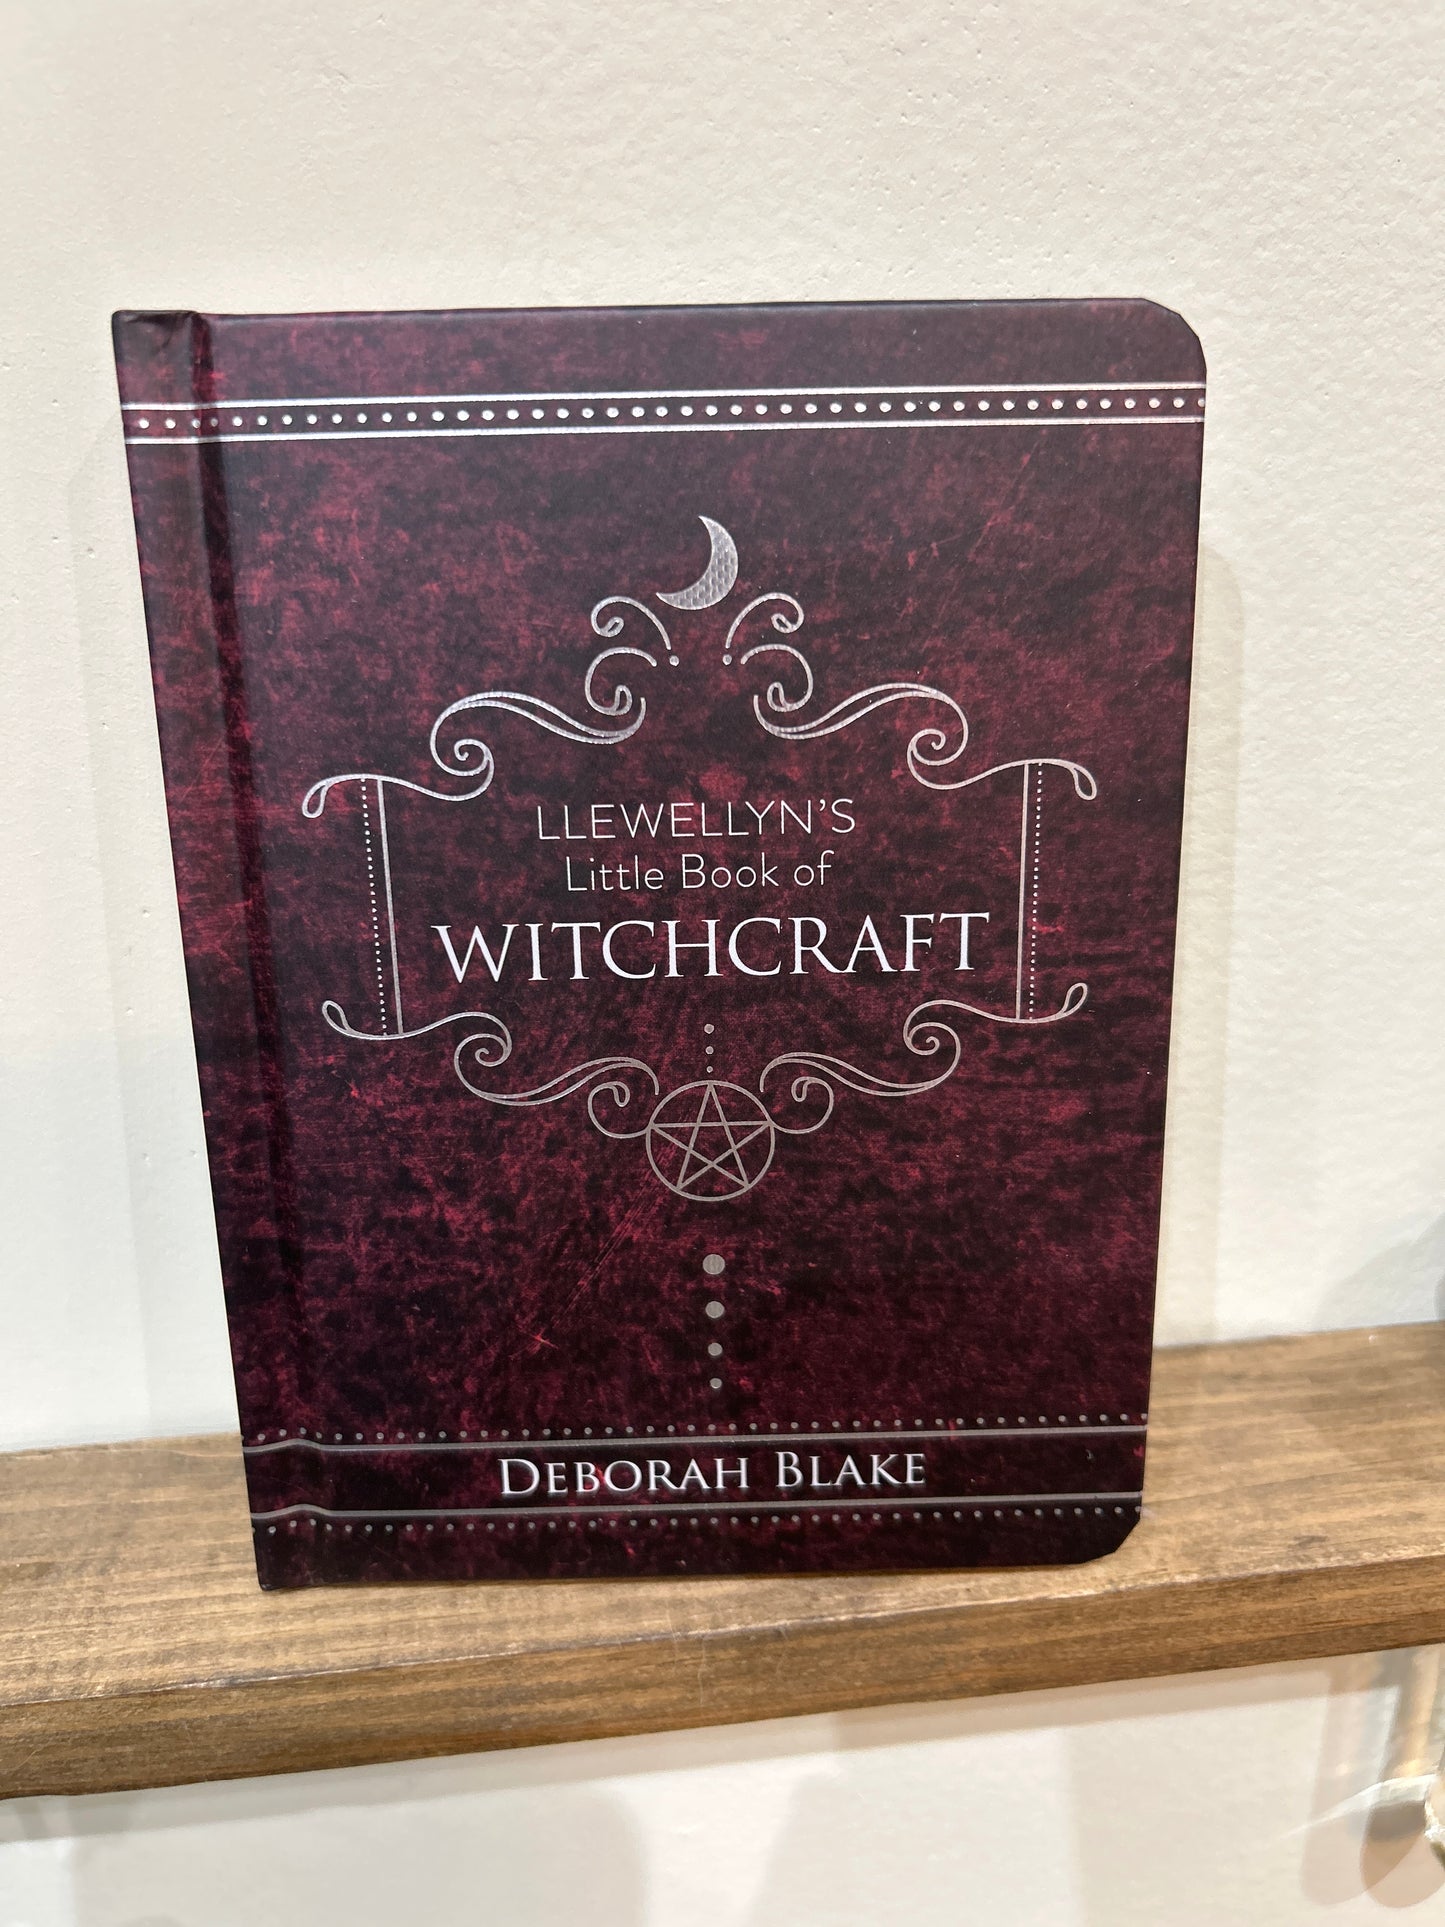 Llewellyn’s little book of witchcraft